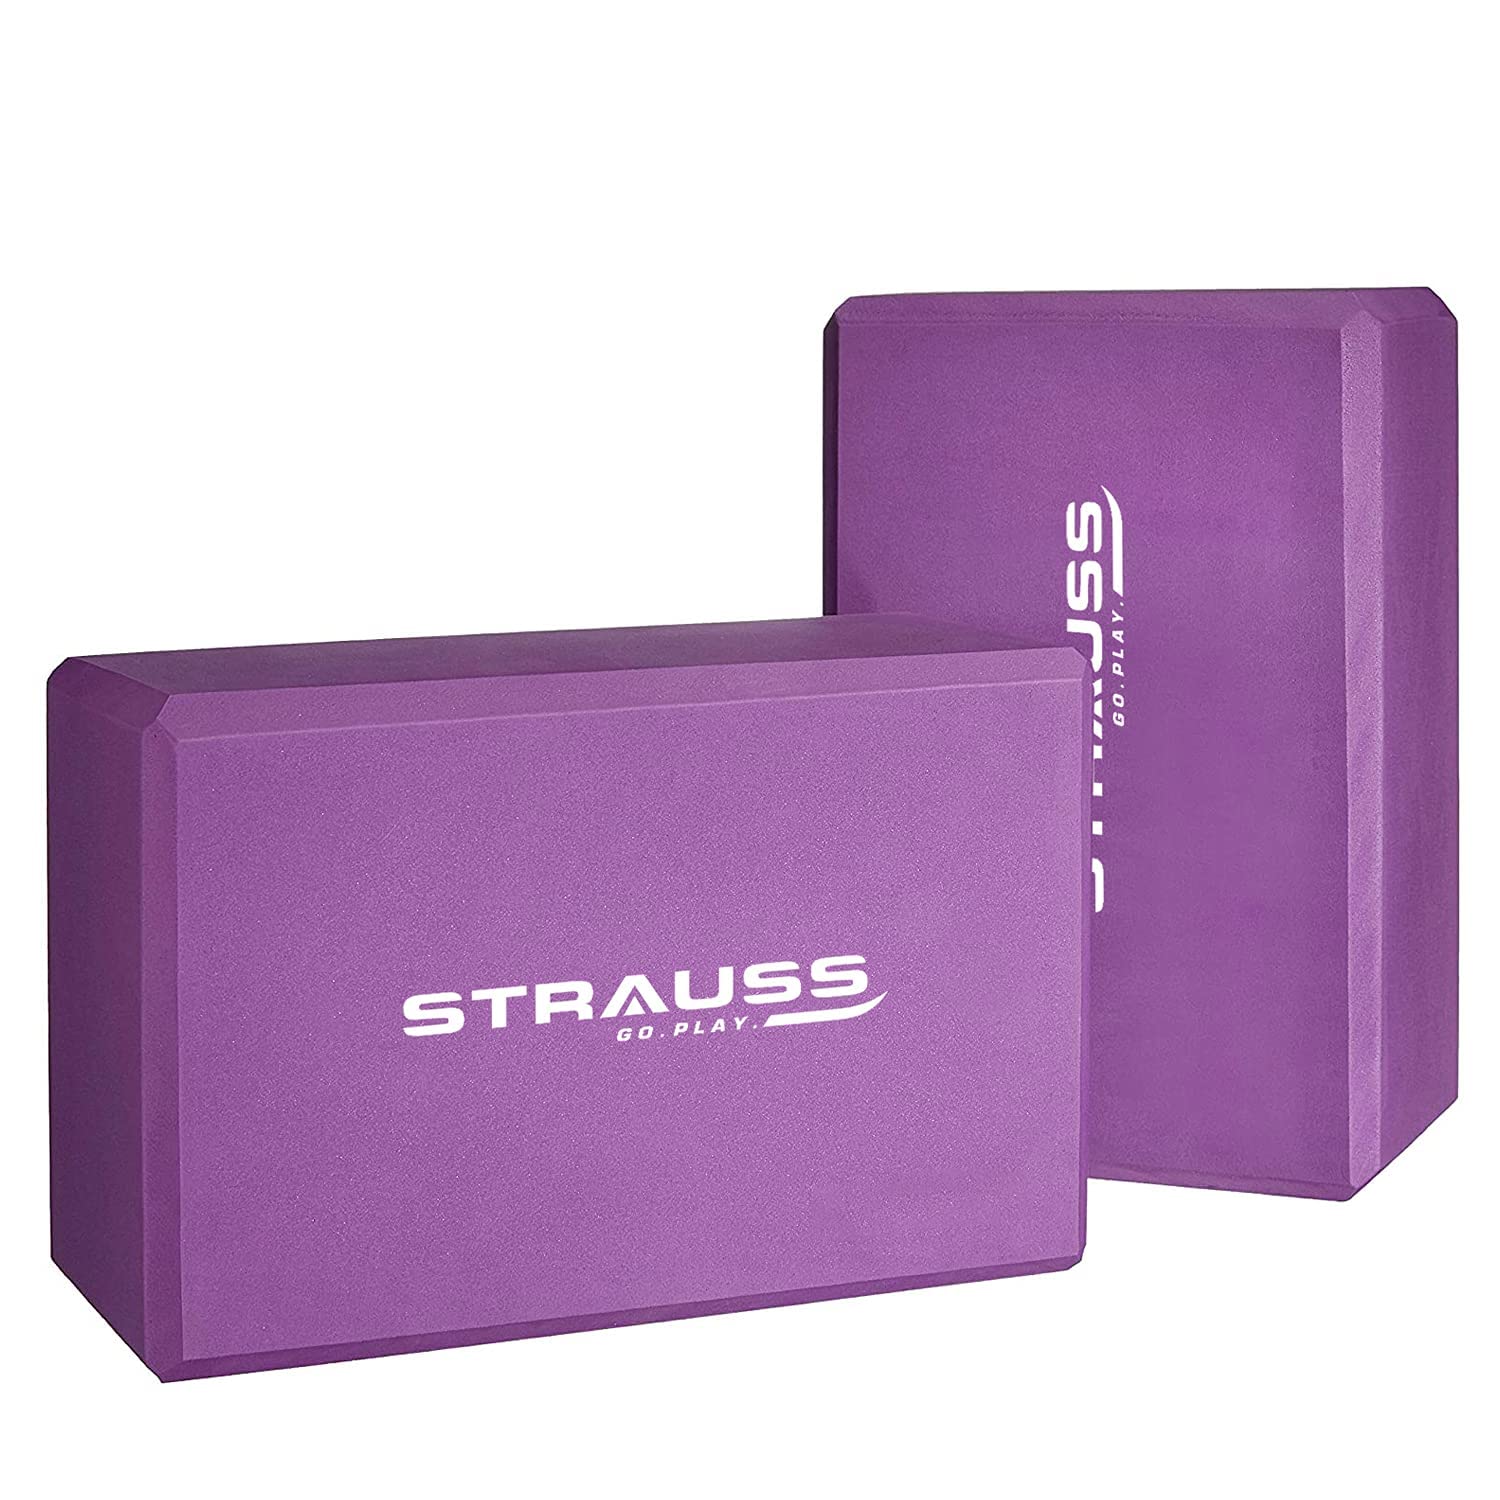 Strauss Yoga Block, (Blue) ( ST-1420 ) at Rs 172/piece